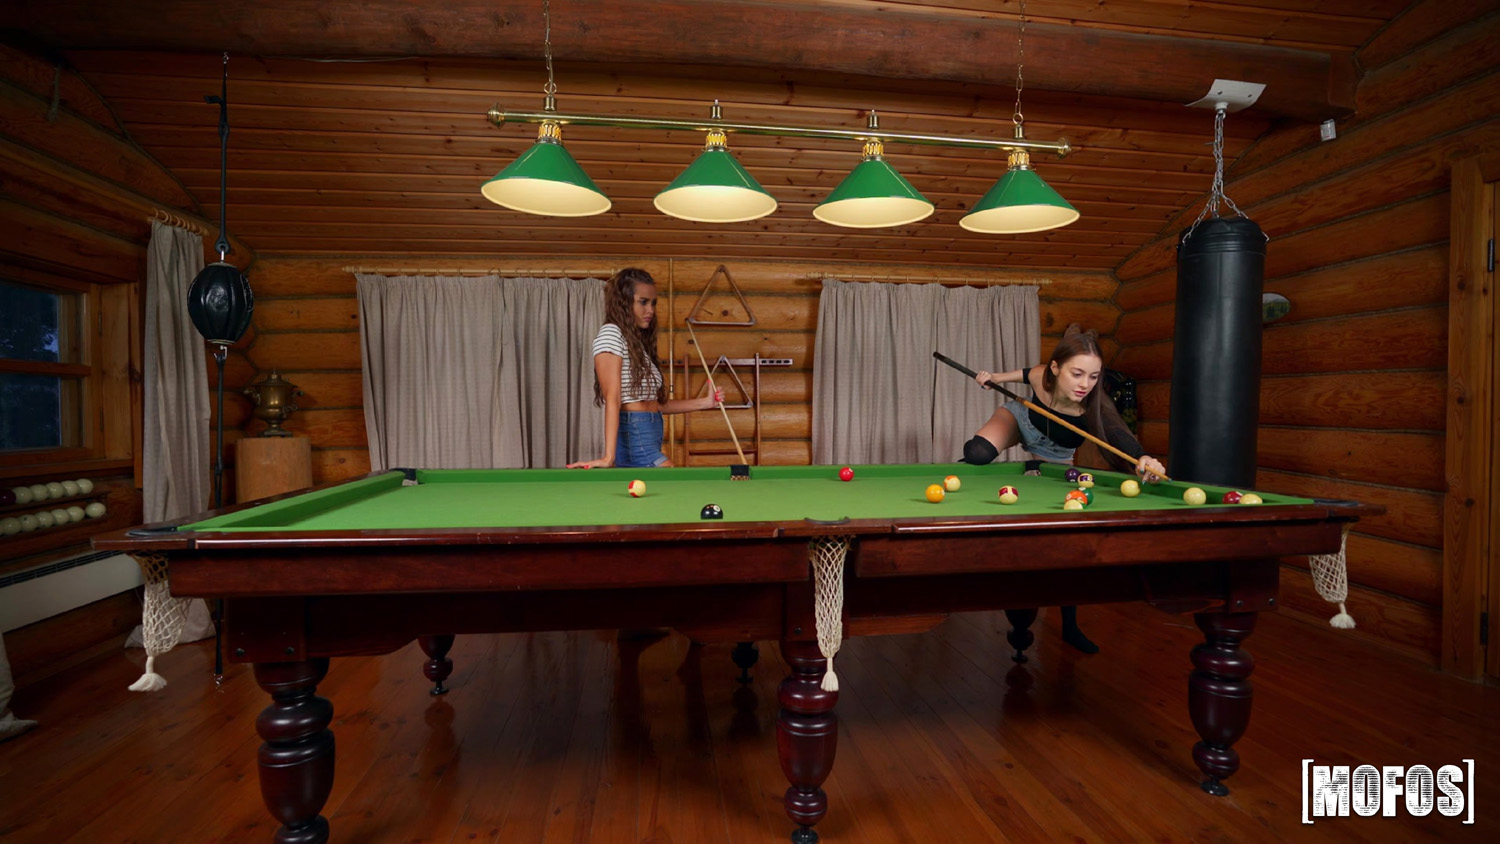 SolaZola and Luxury Girl pleasuring pussies on top of the pool table